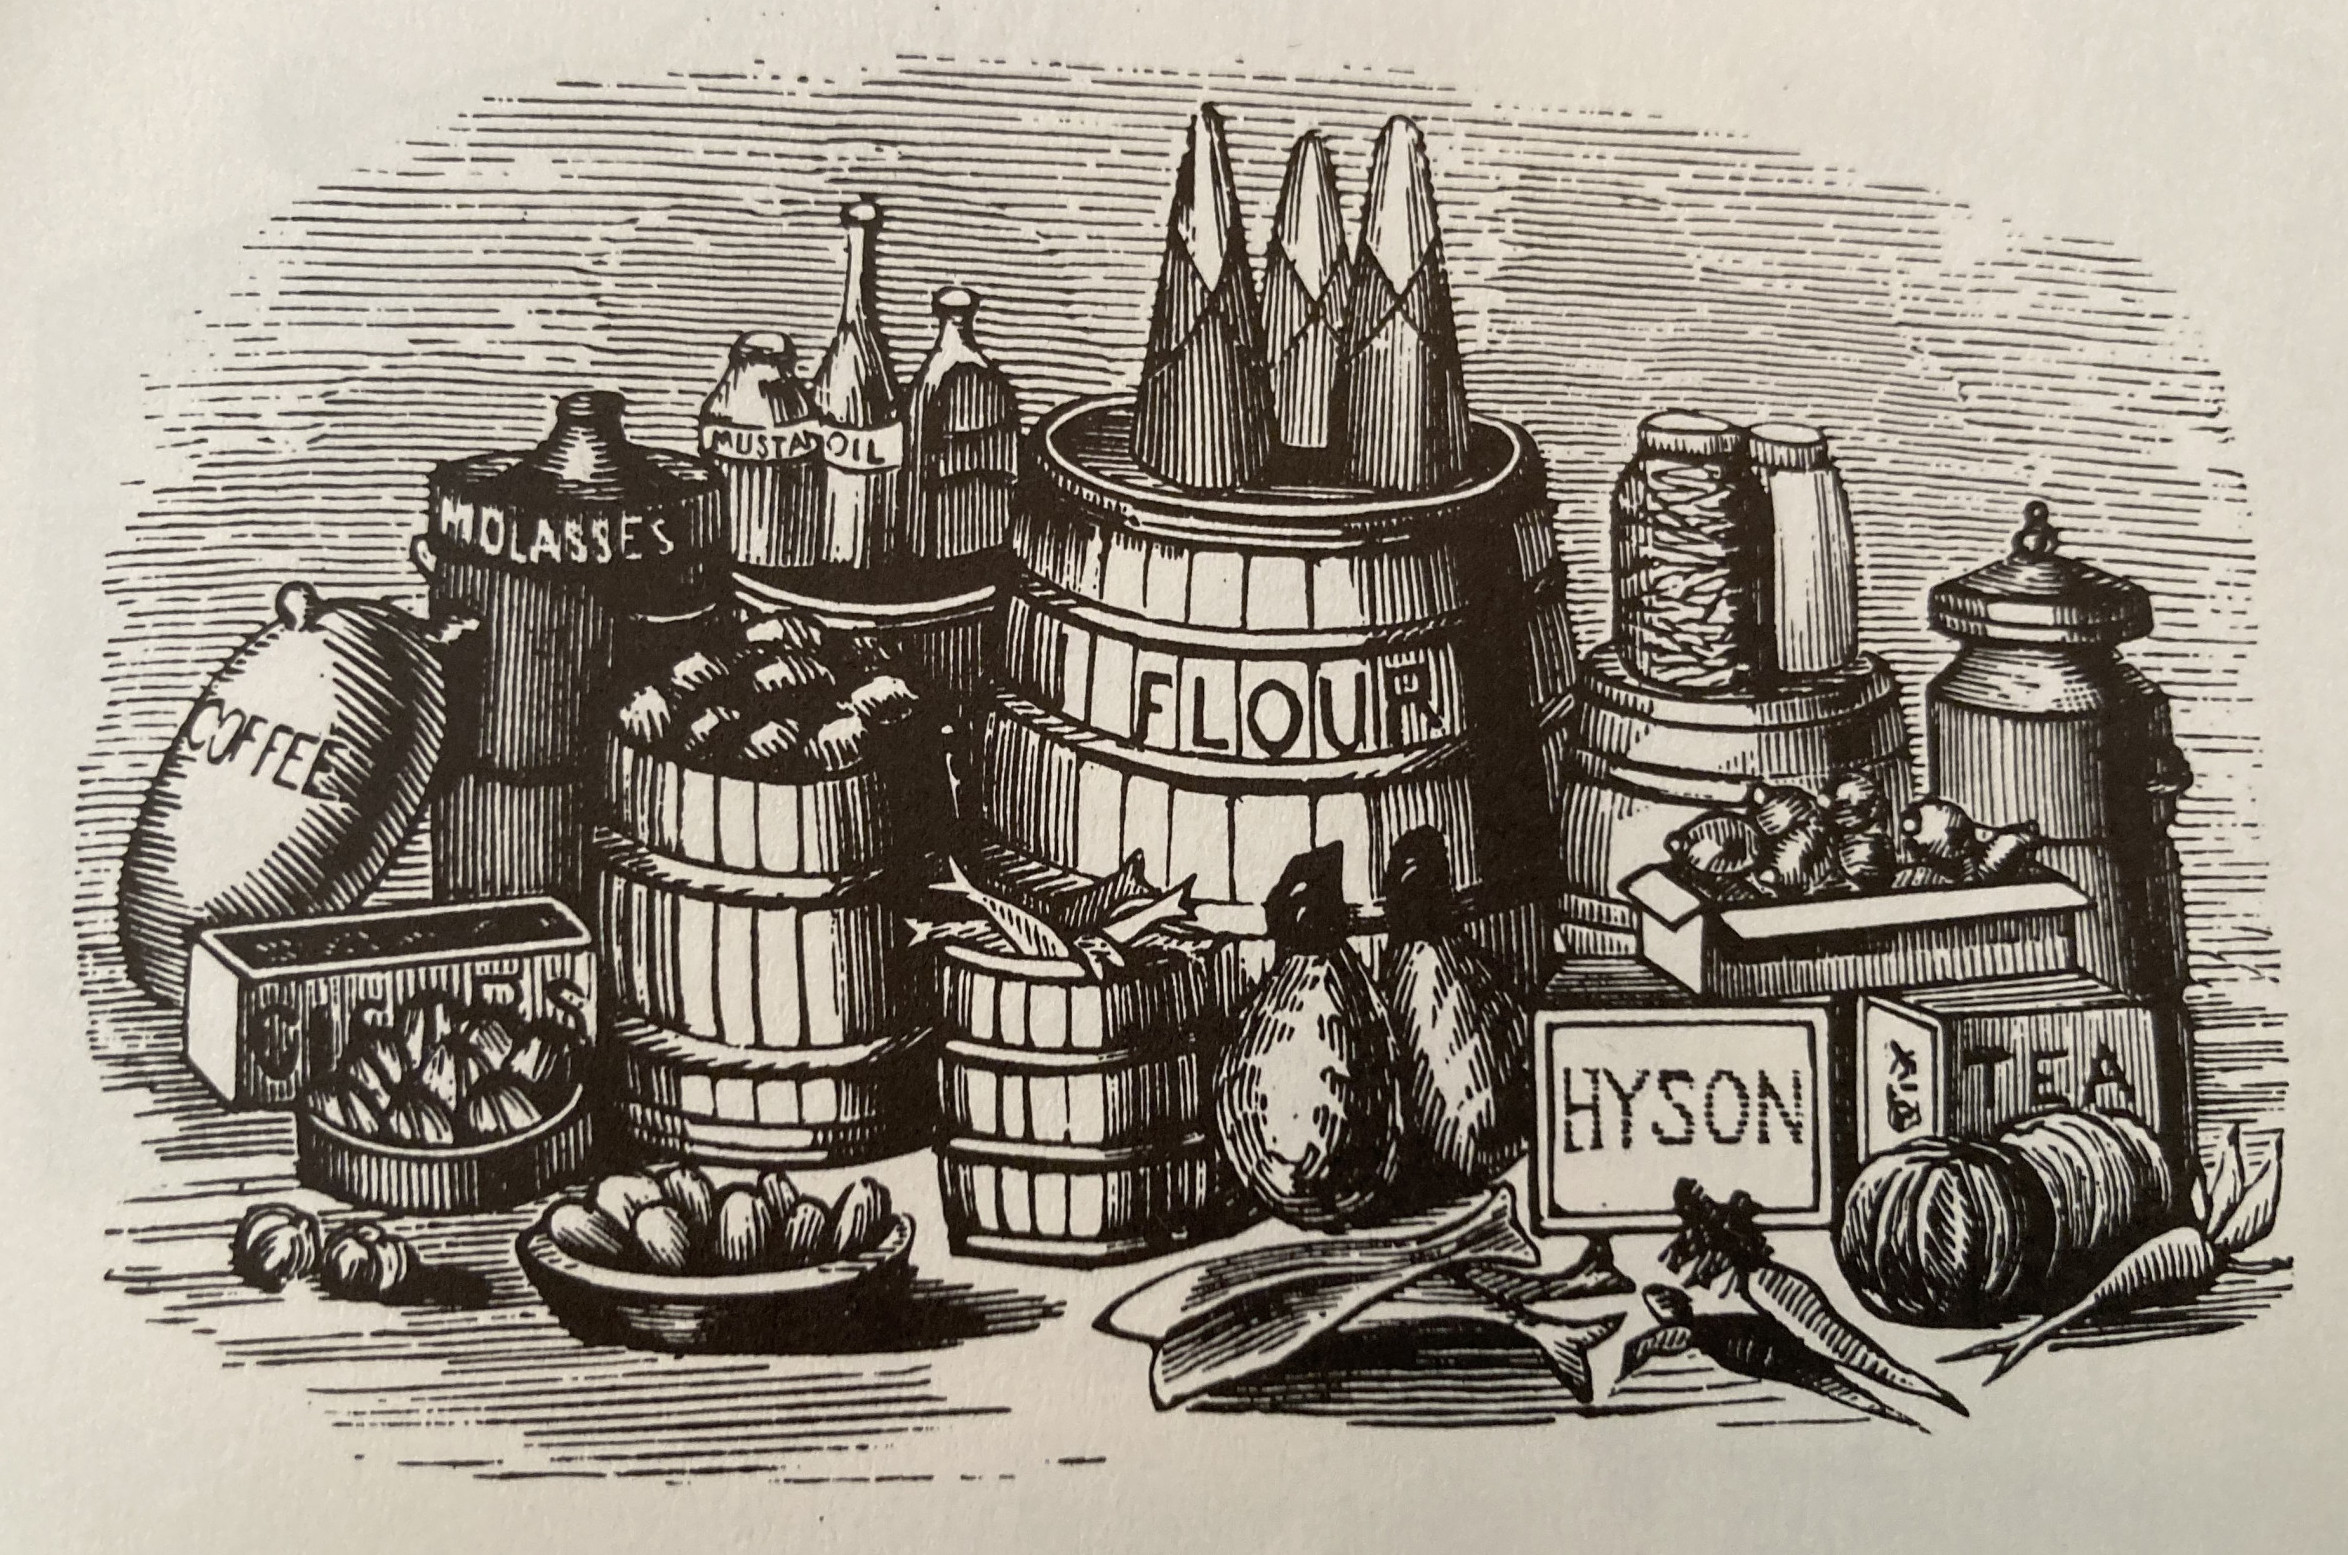 Old engraving of flour, molasses, and other foods in barrels and boxes.